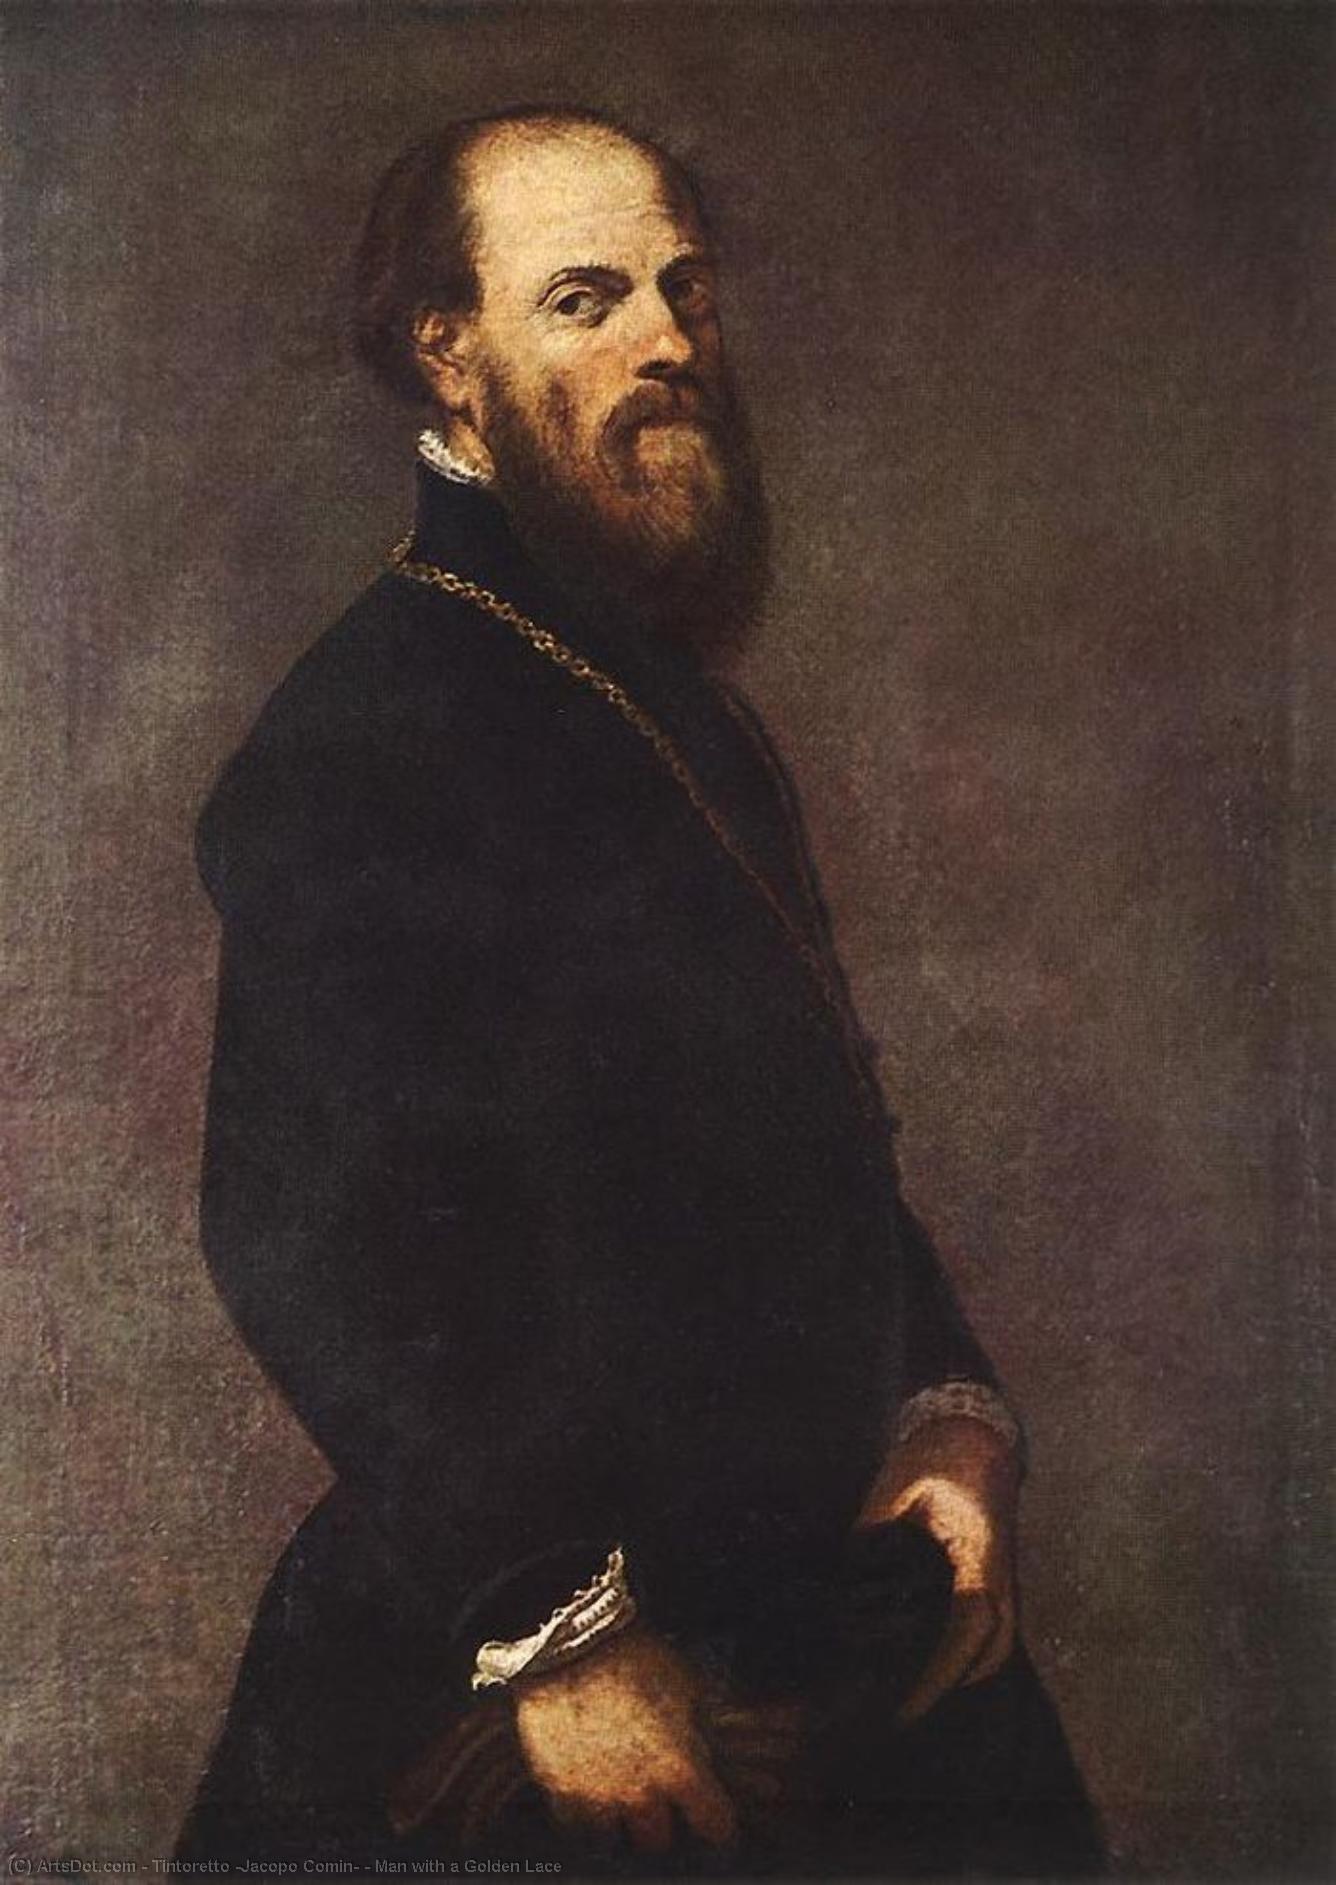 Buy Museum Art Reproductions Man with a Golden Lace, 1550 by Tintoretto (Jacopo Comin) (1518-1594, Italy) | ArtsDot.com